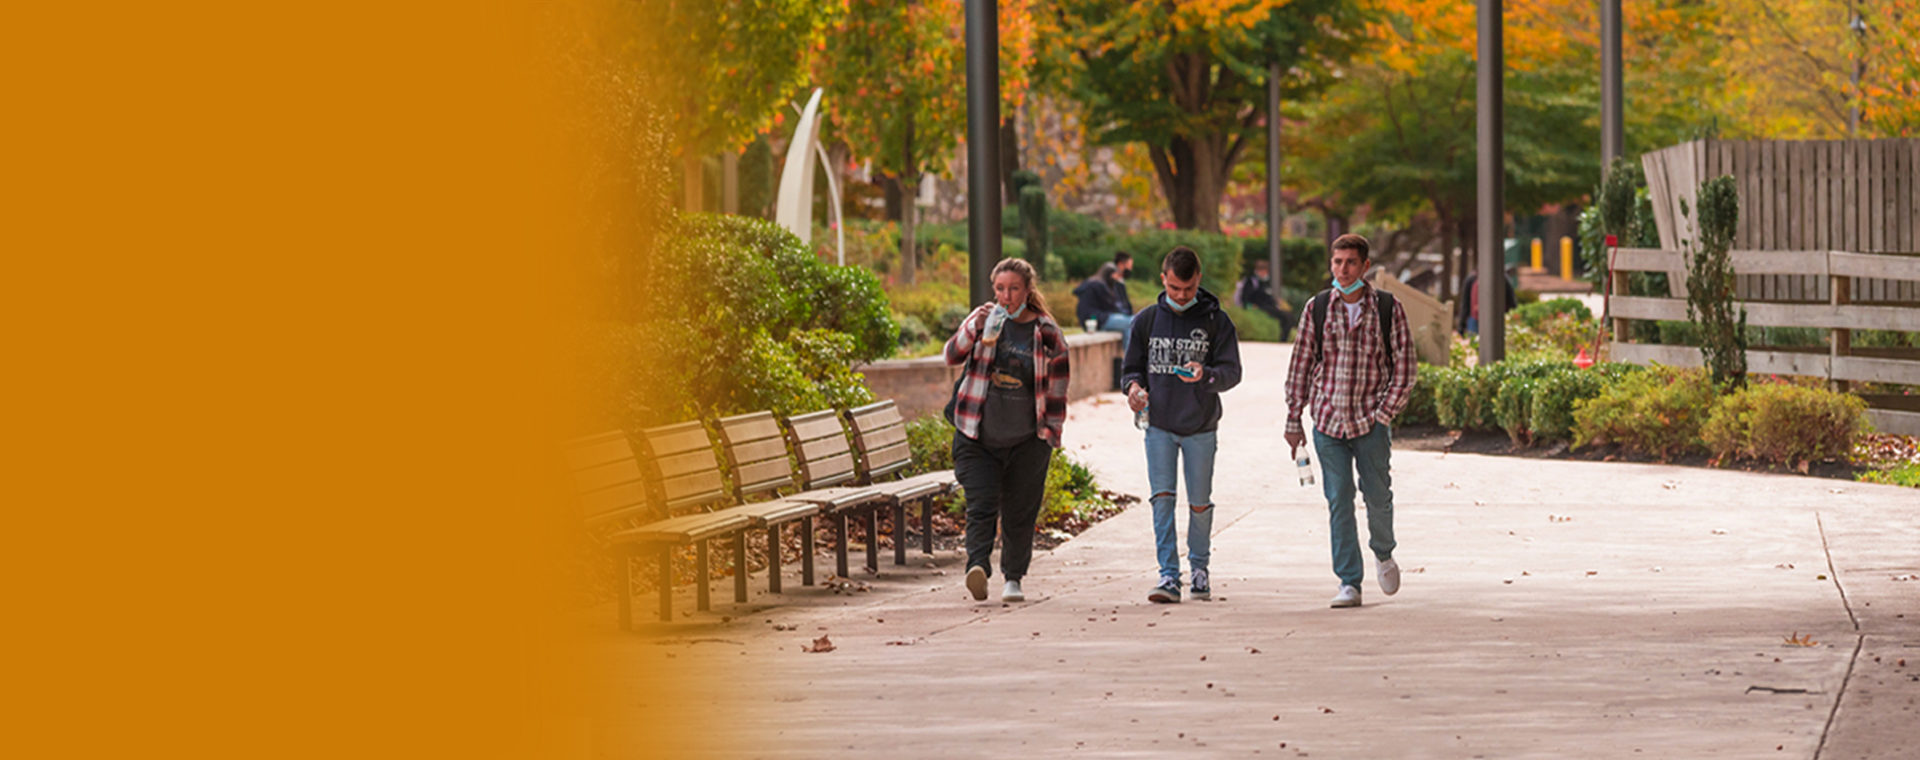 Three students walking down the path on campus